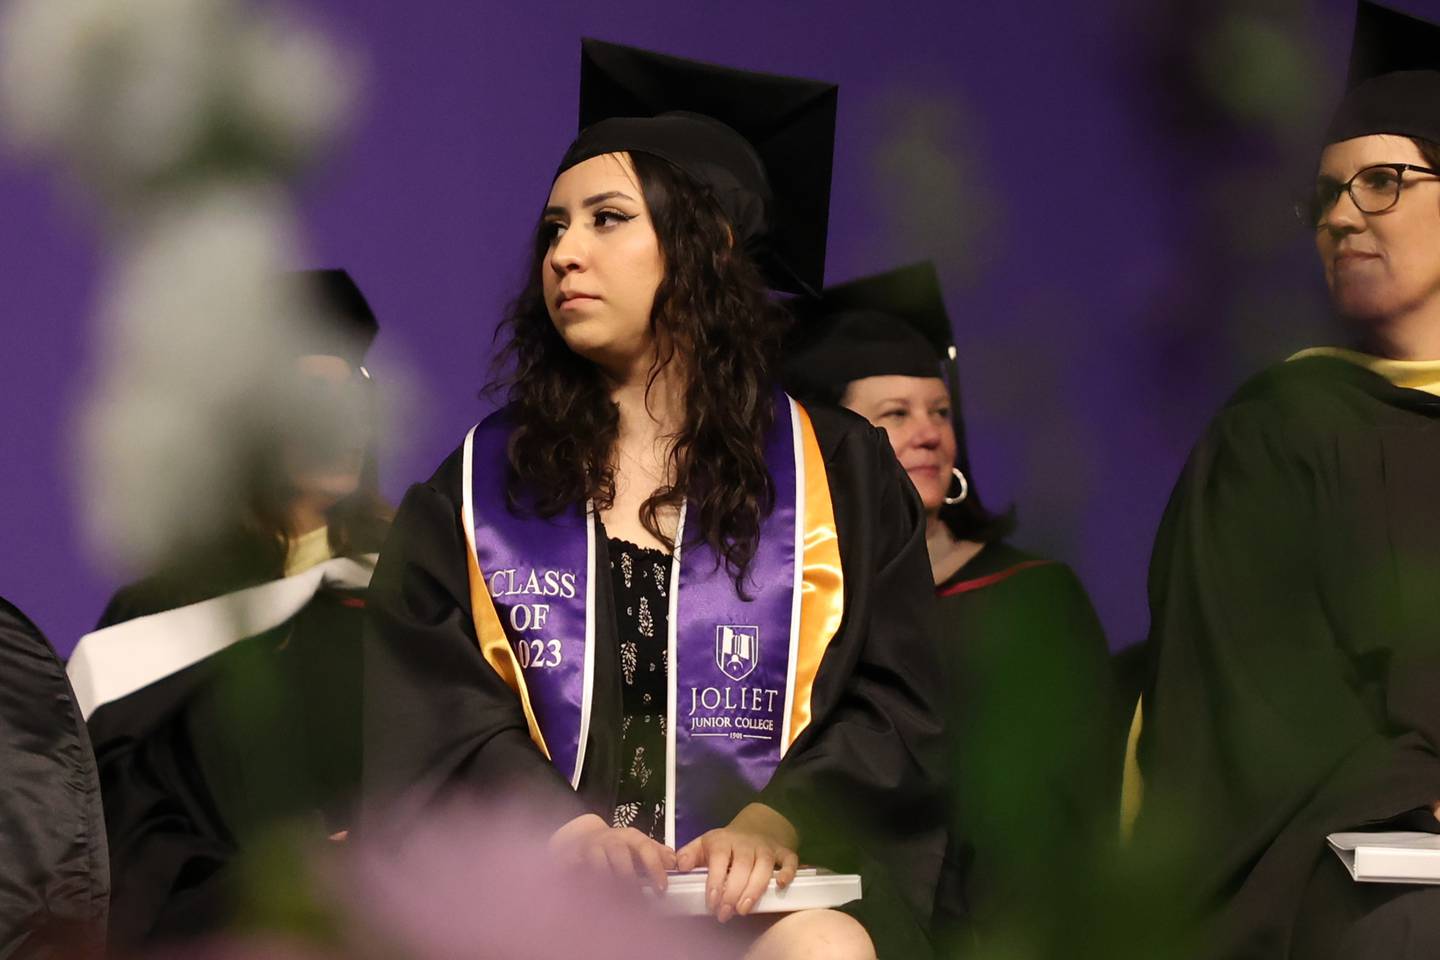 Andrea Barron sits on the stage during the Joliet Junior College Commencement Ceremony on Friday, May 19, 2023, in Joliet.